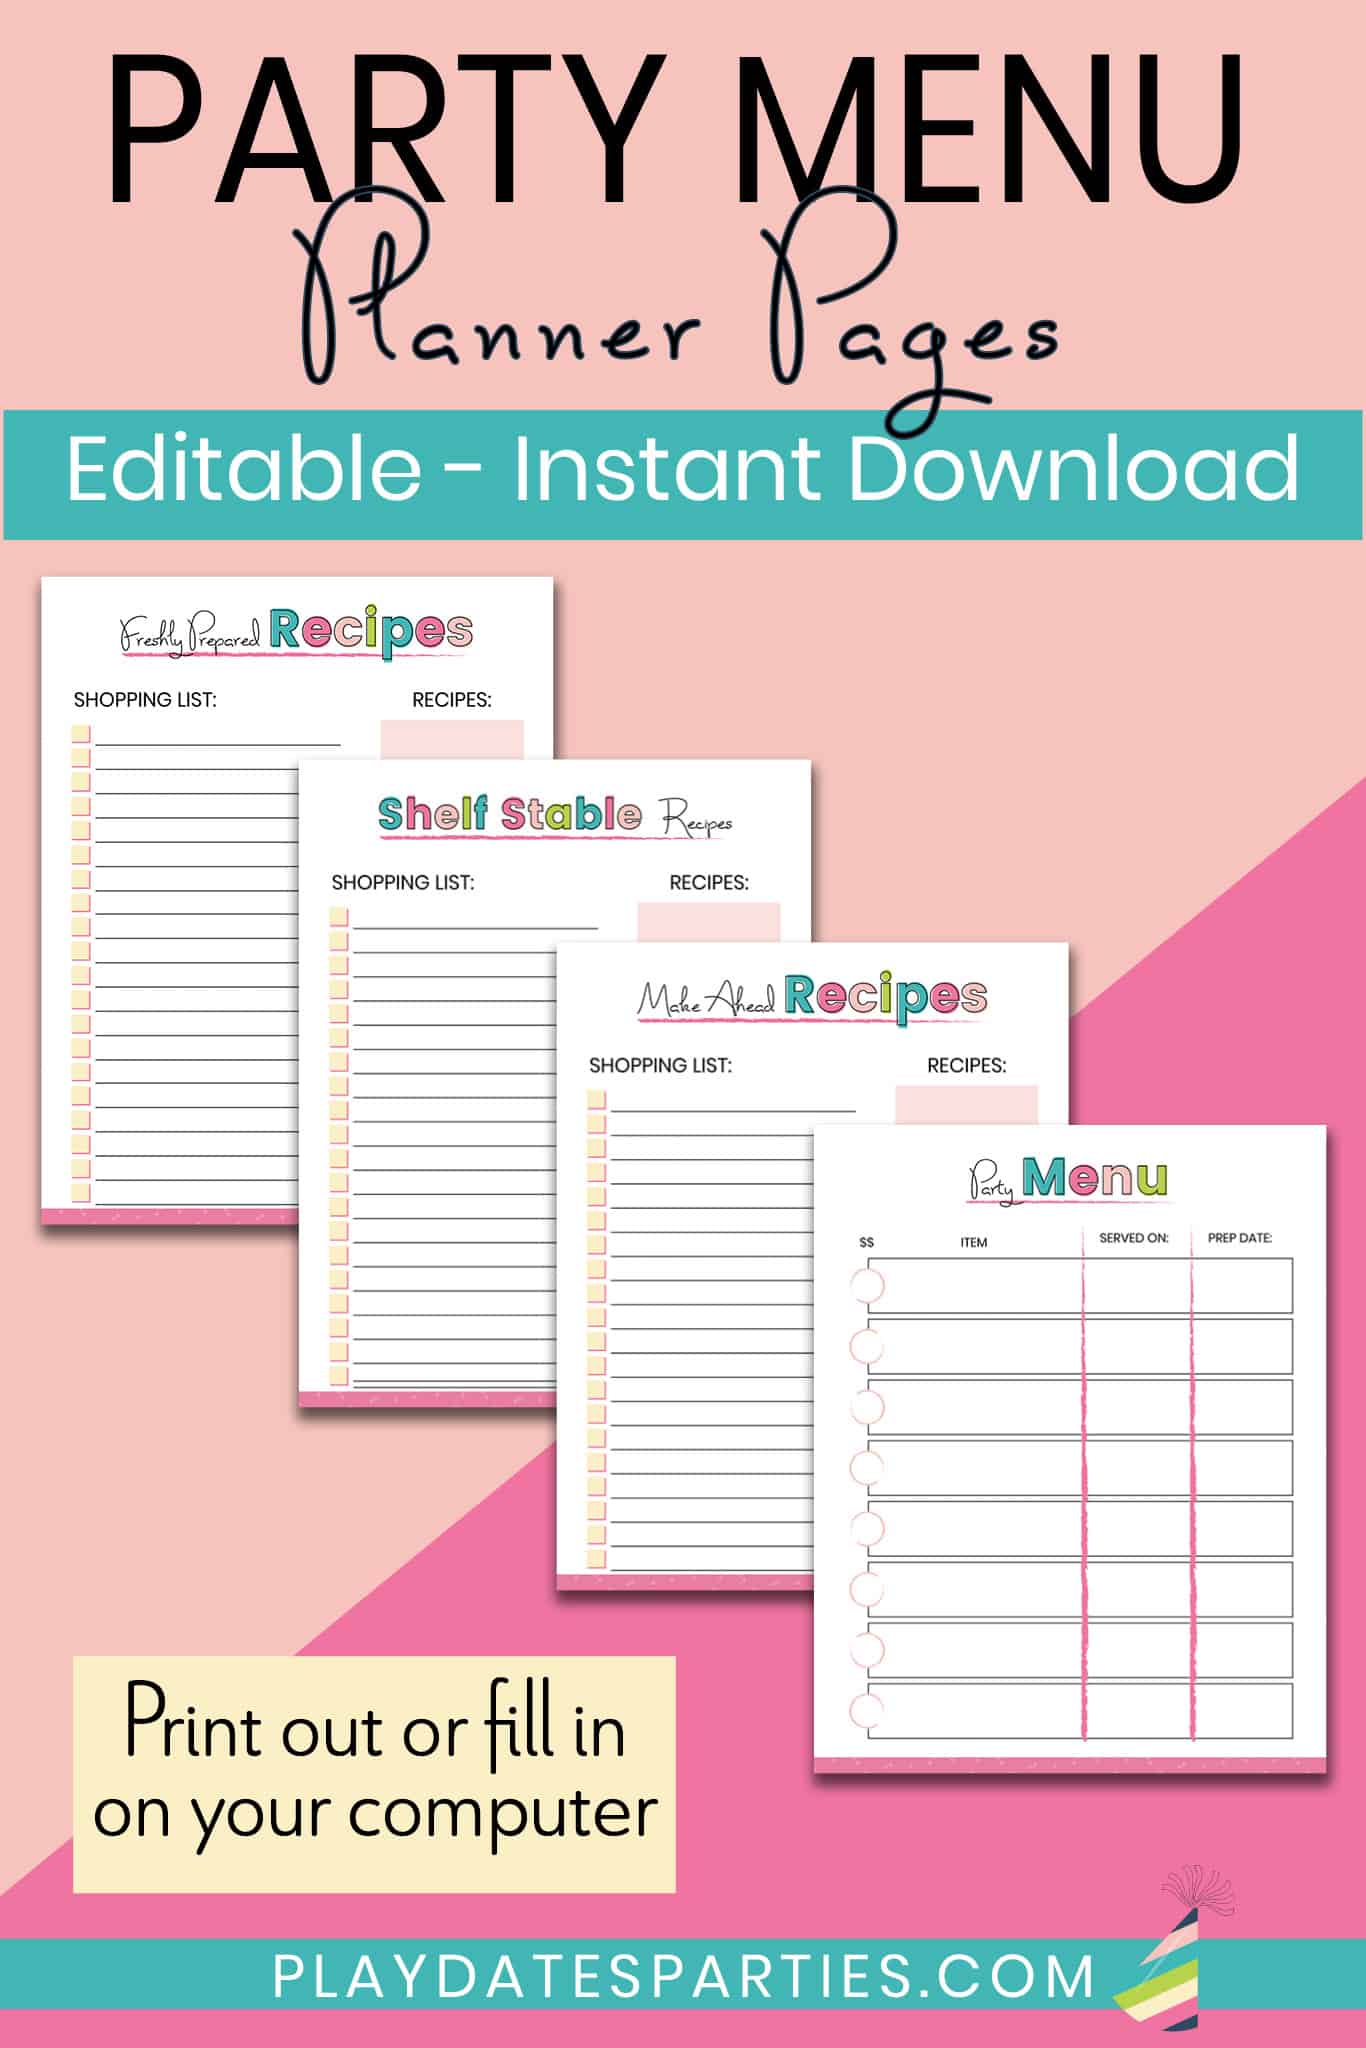 Party Menu Planner and Shopping List